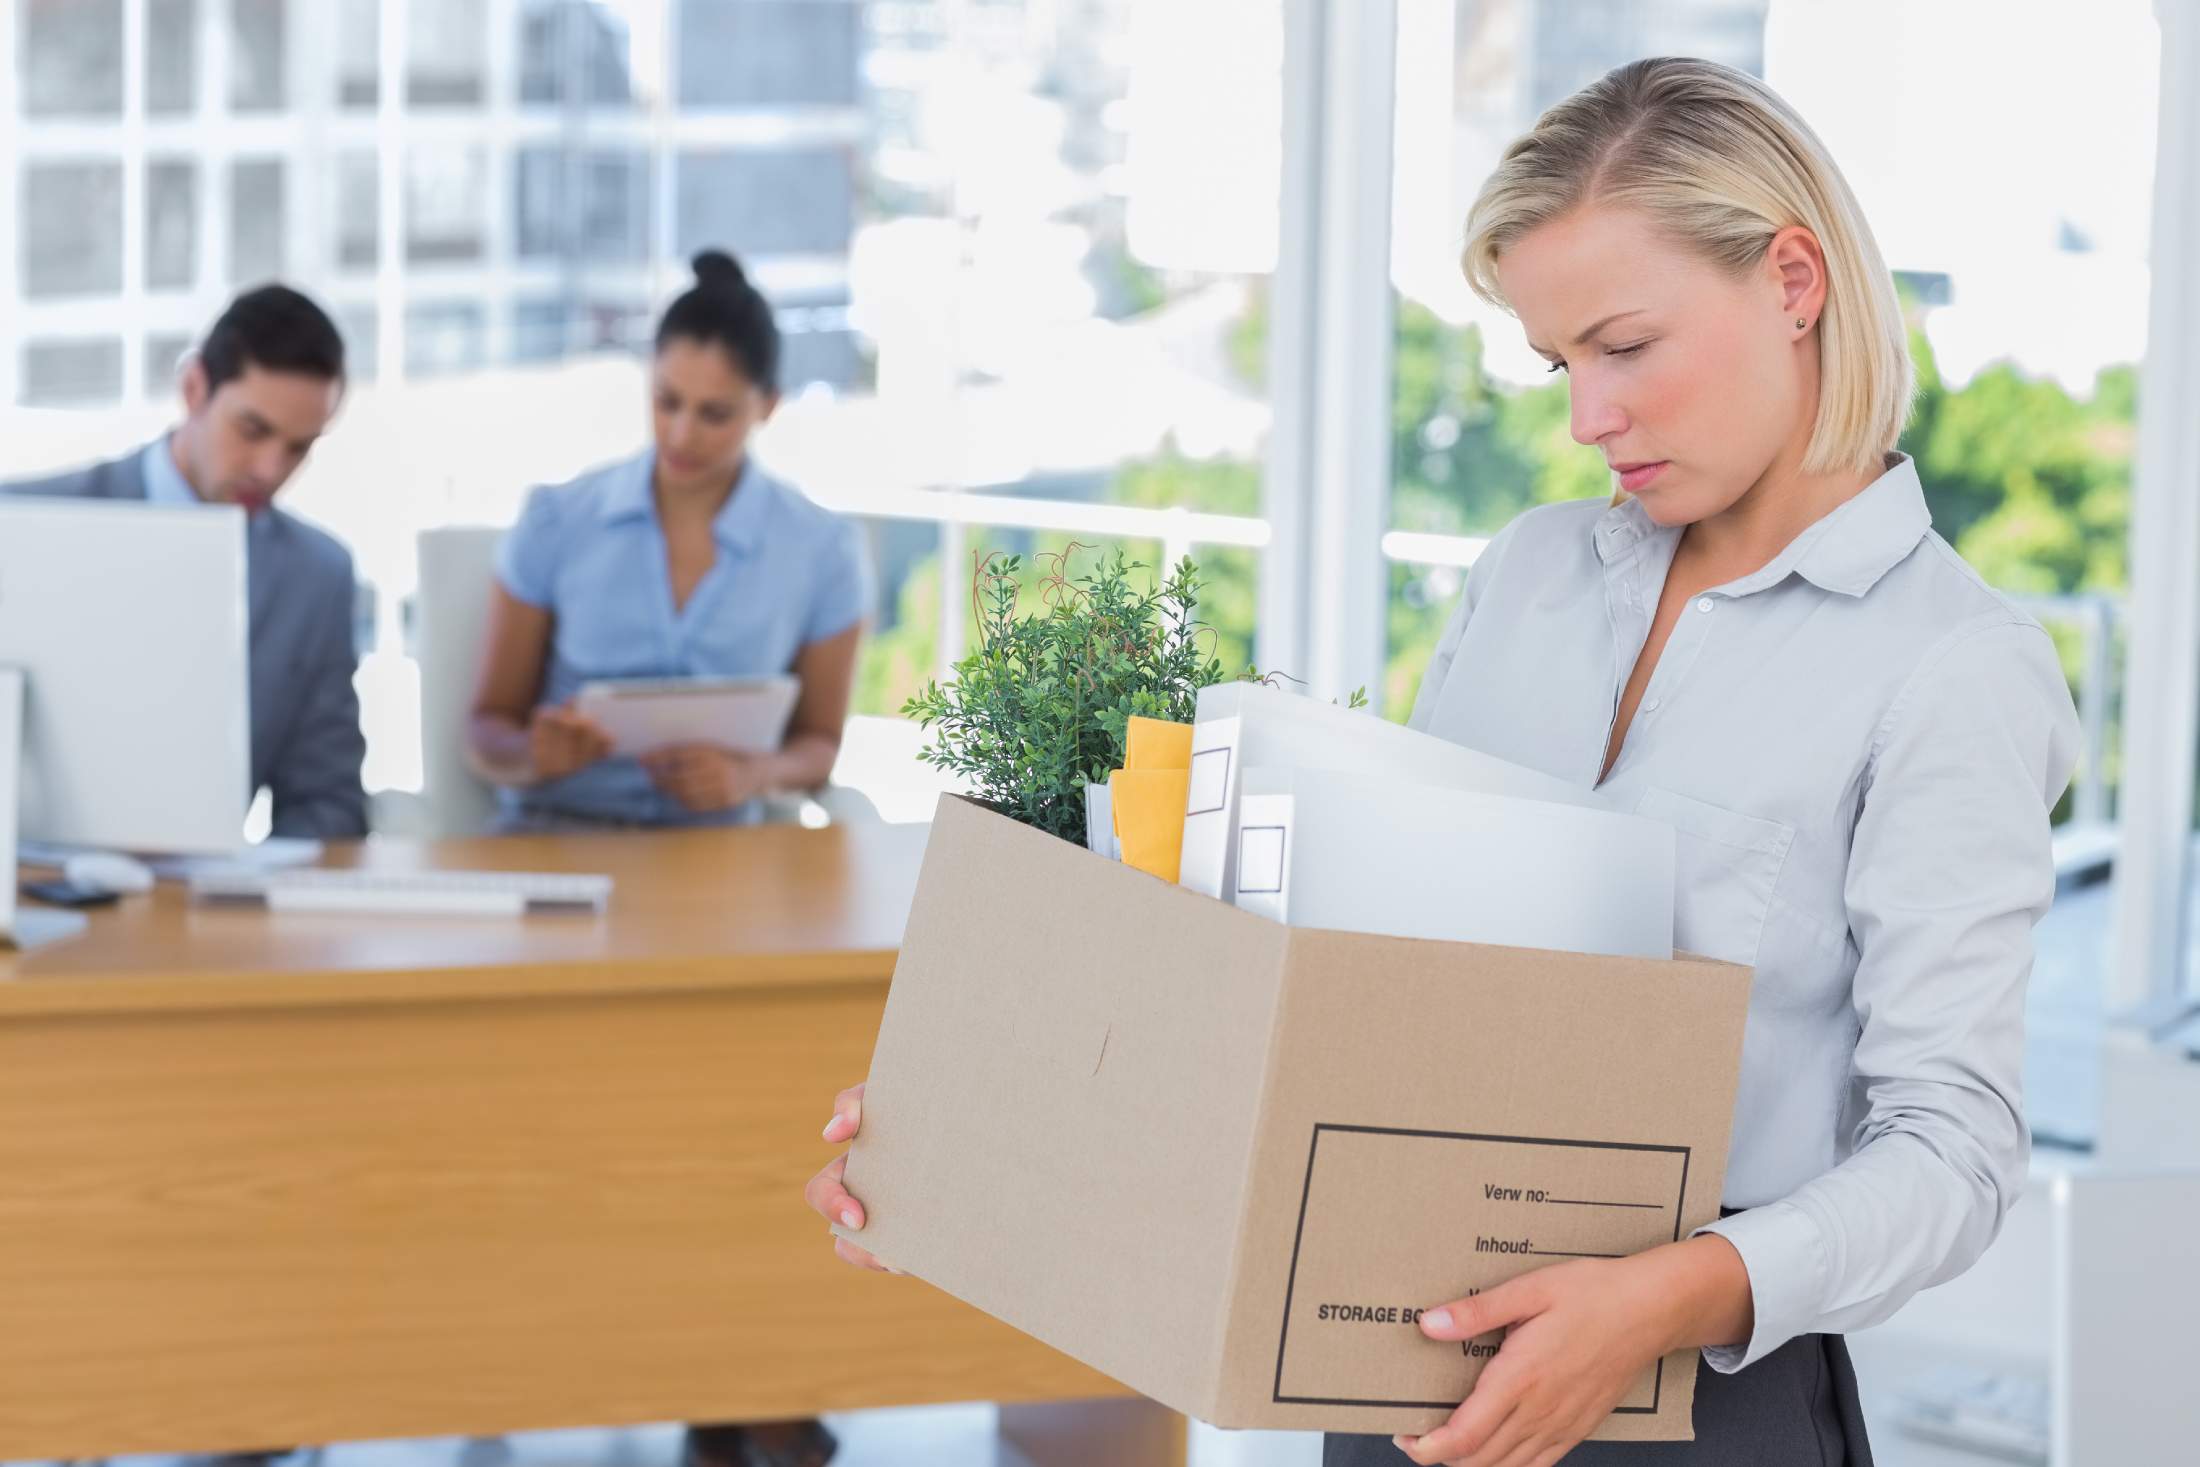 Corporate Downsizing and Potentially Difficult Terminations